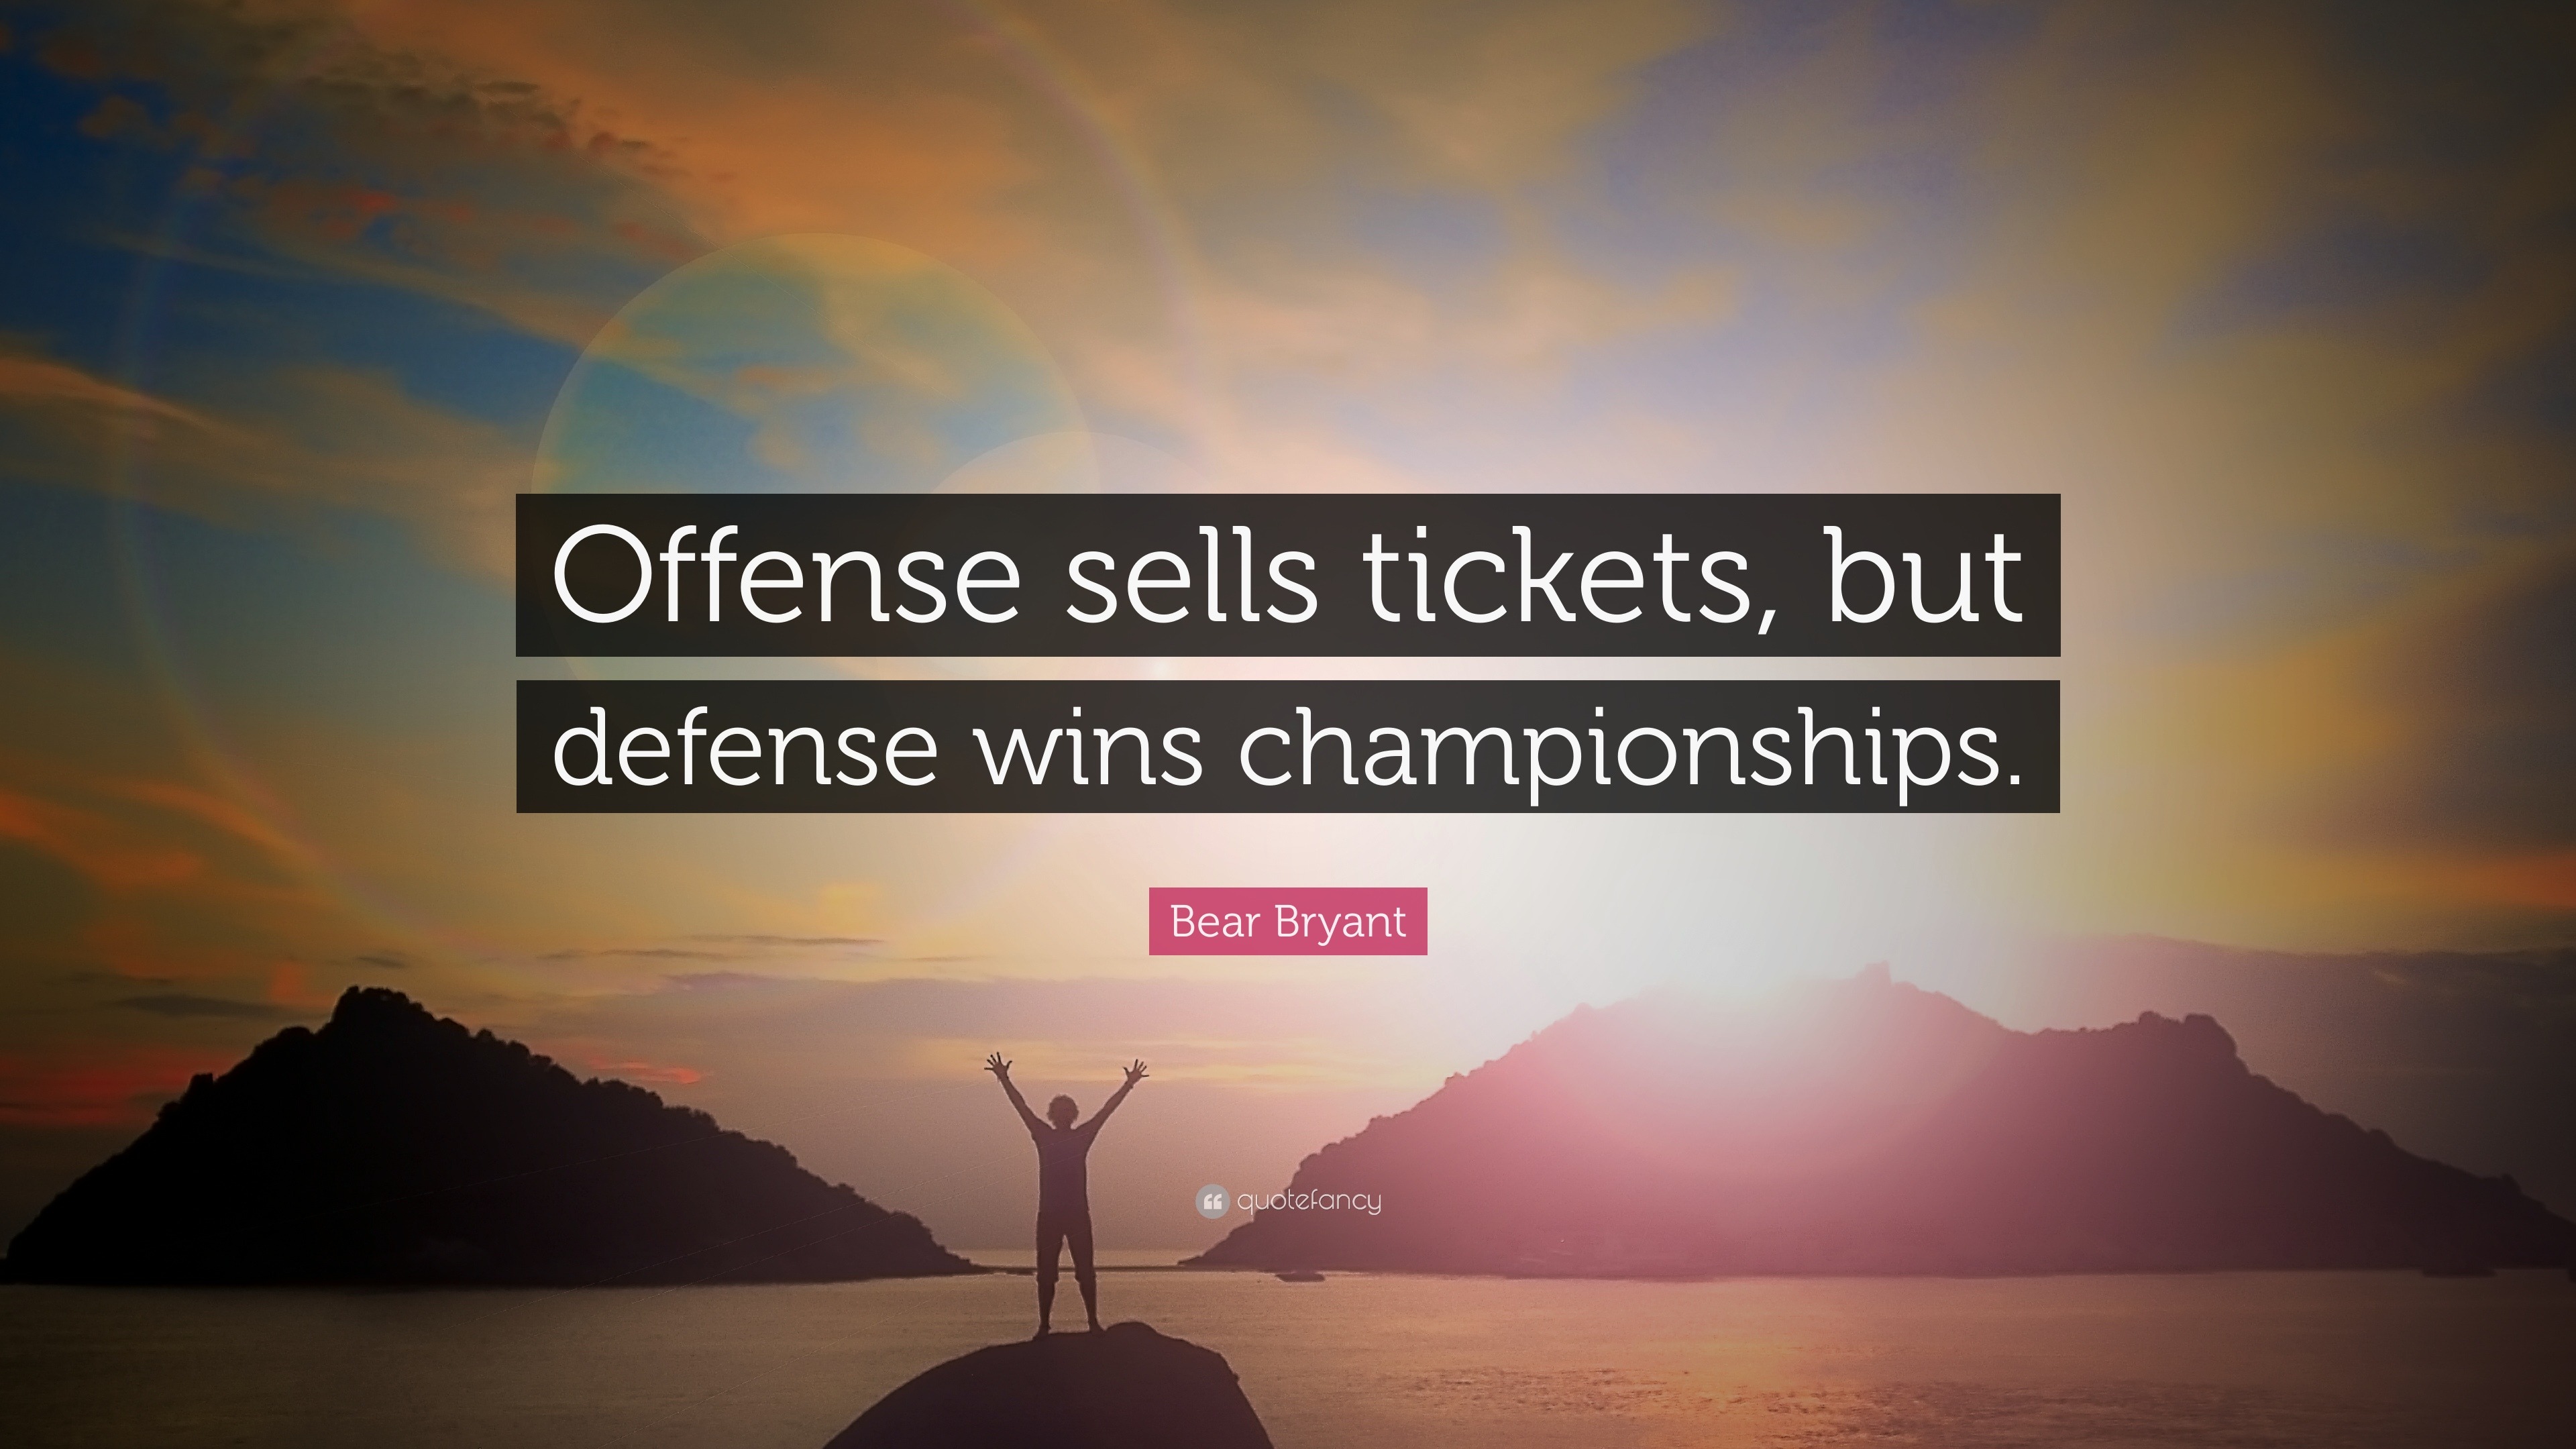 Bear Bryant Quote: “Offense sells tickets, but defense wins